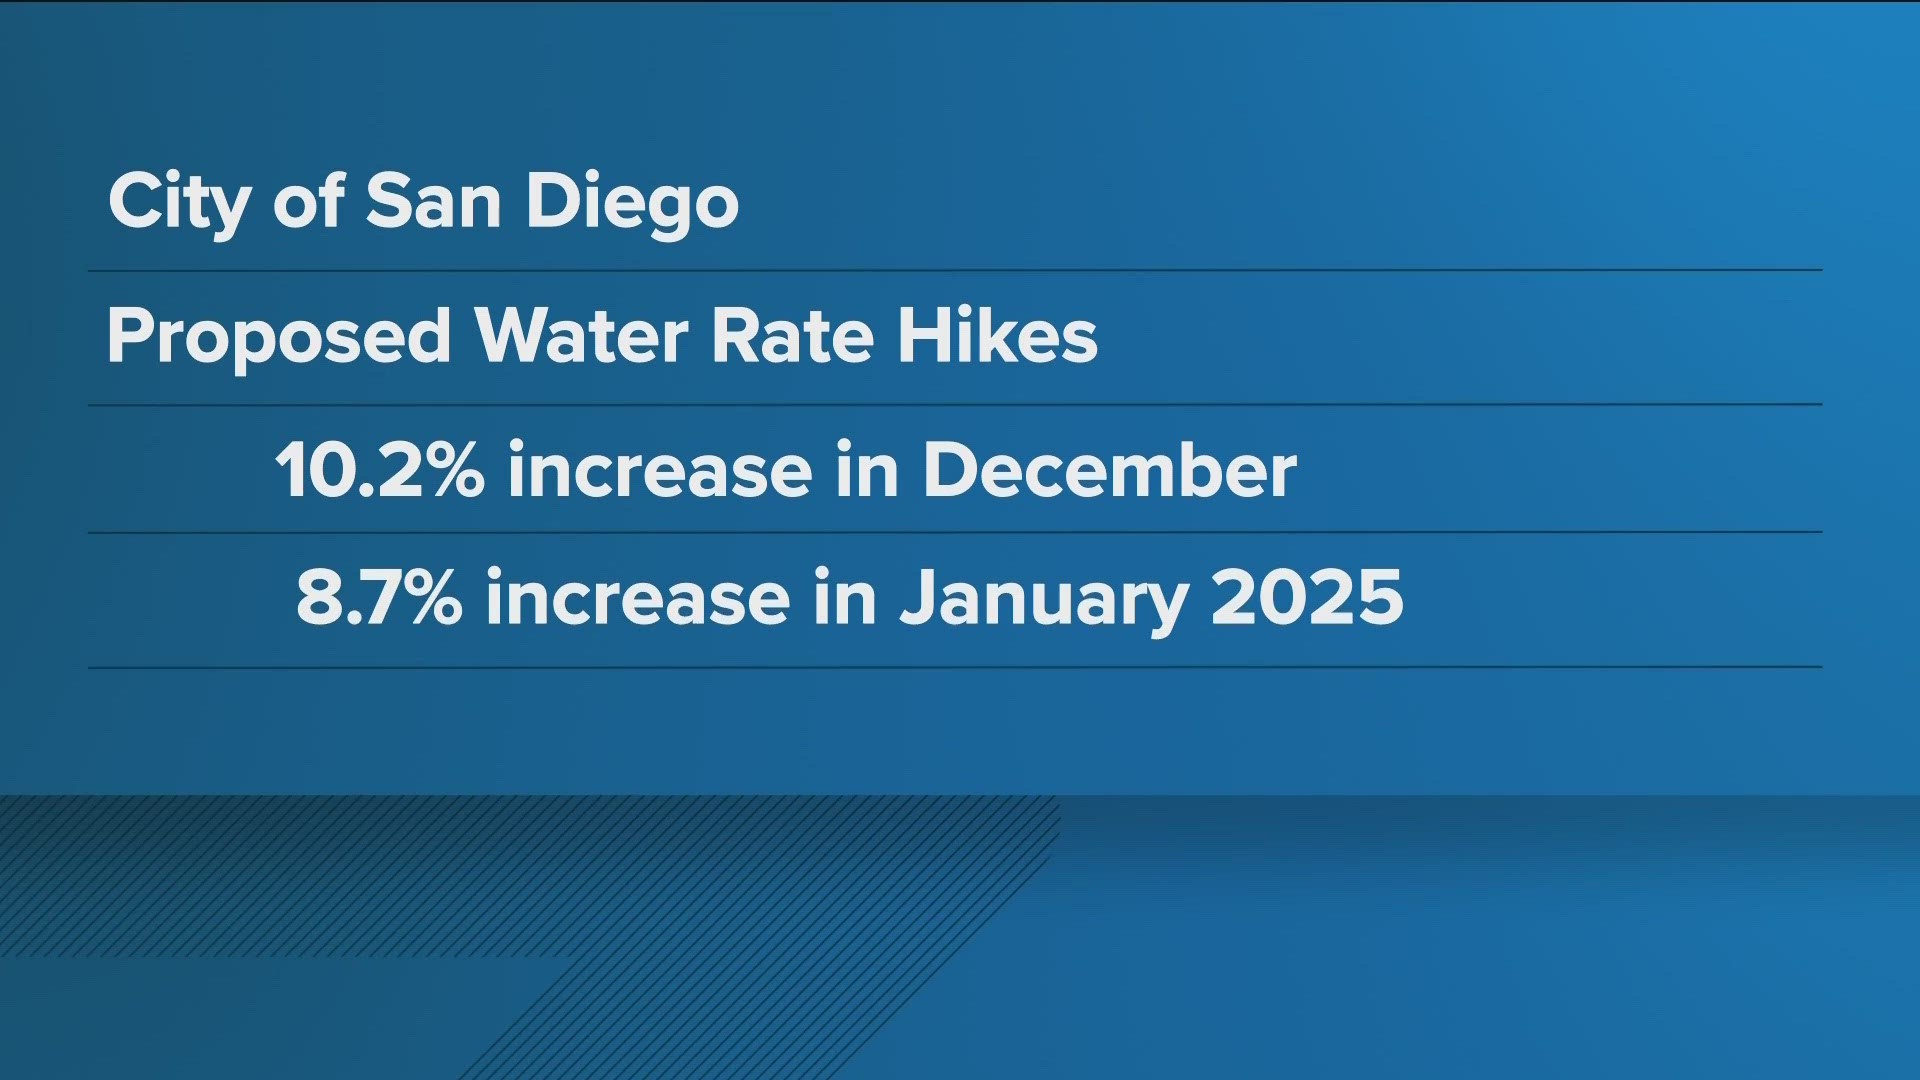 San Diego City Council will vote Tuesday Sept. 19 whether to approve the hike in water price rates.